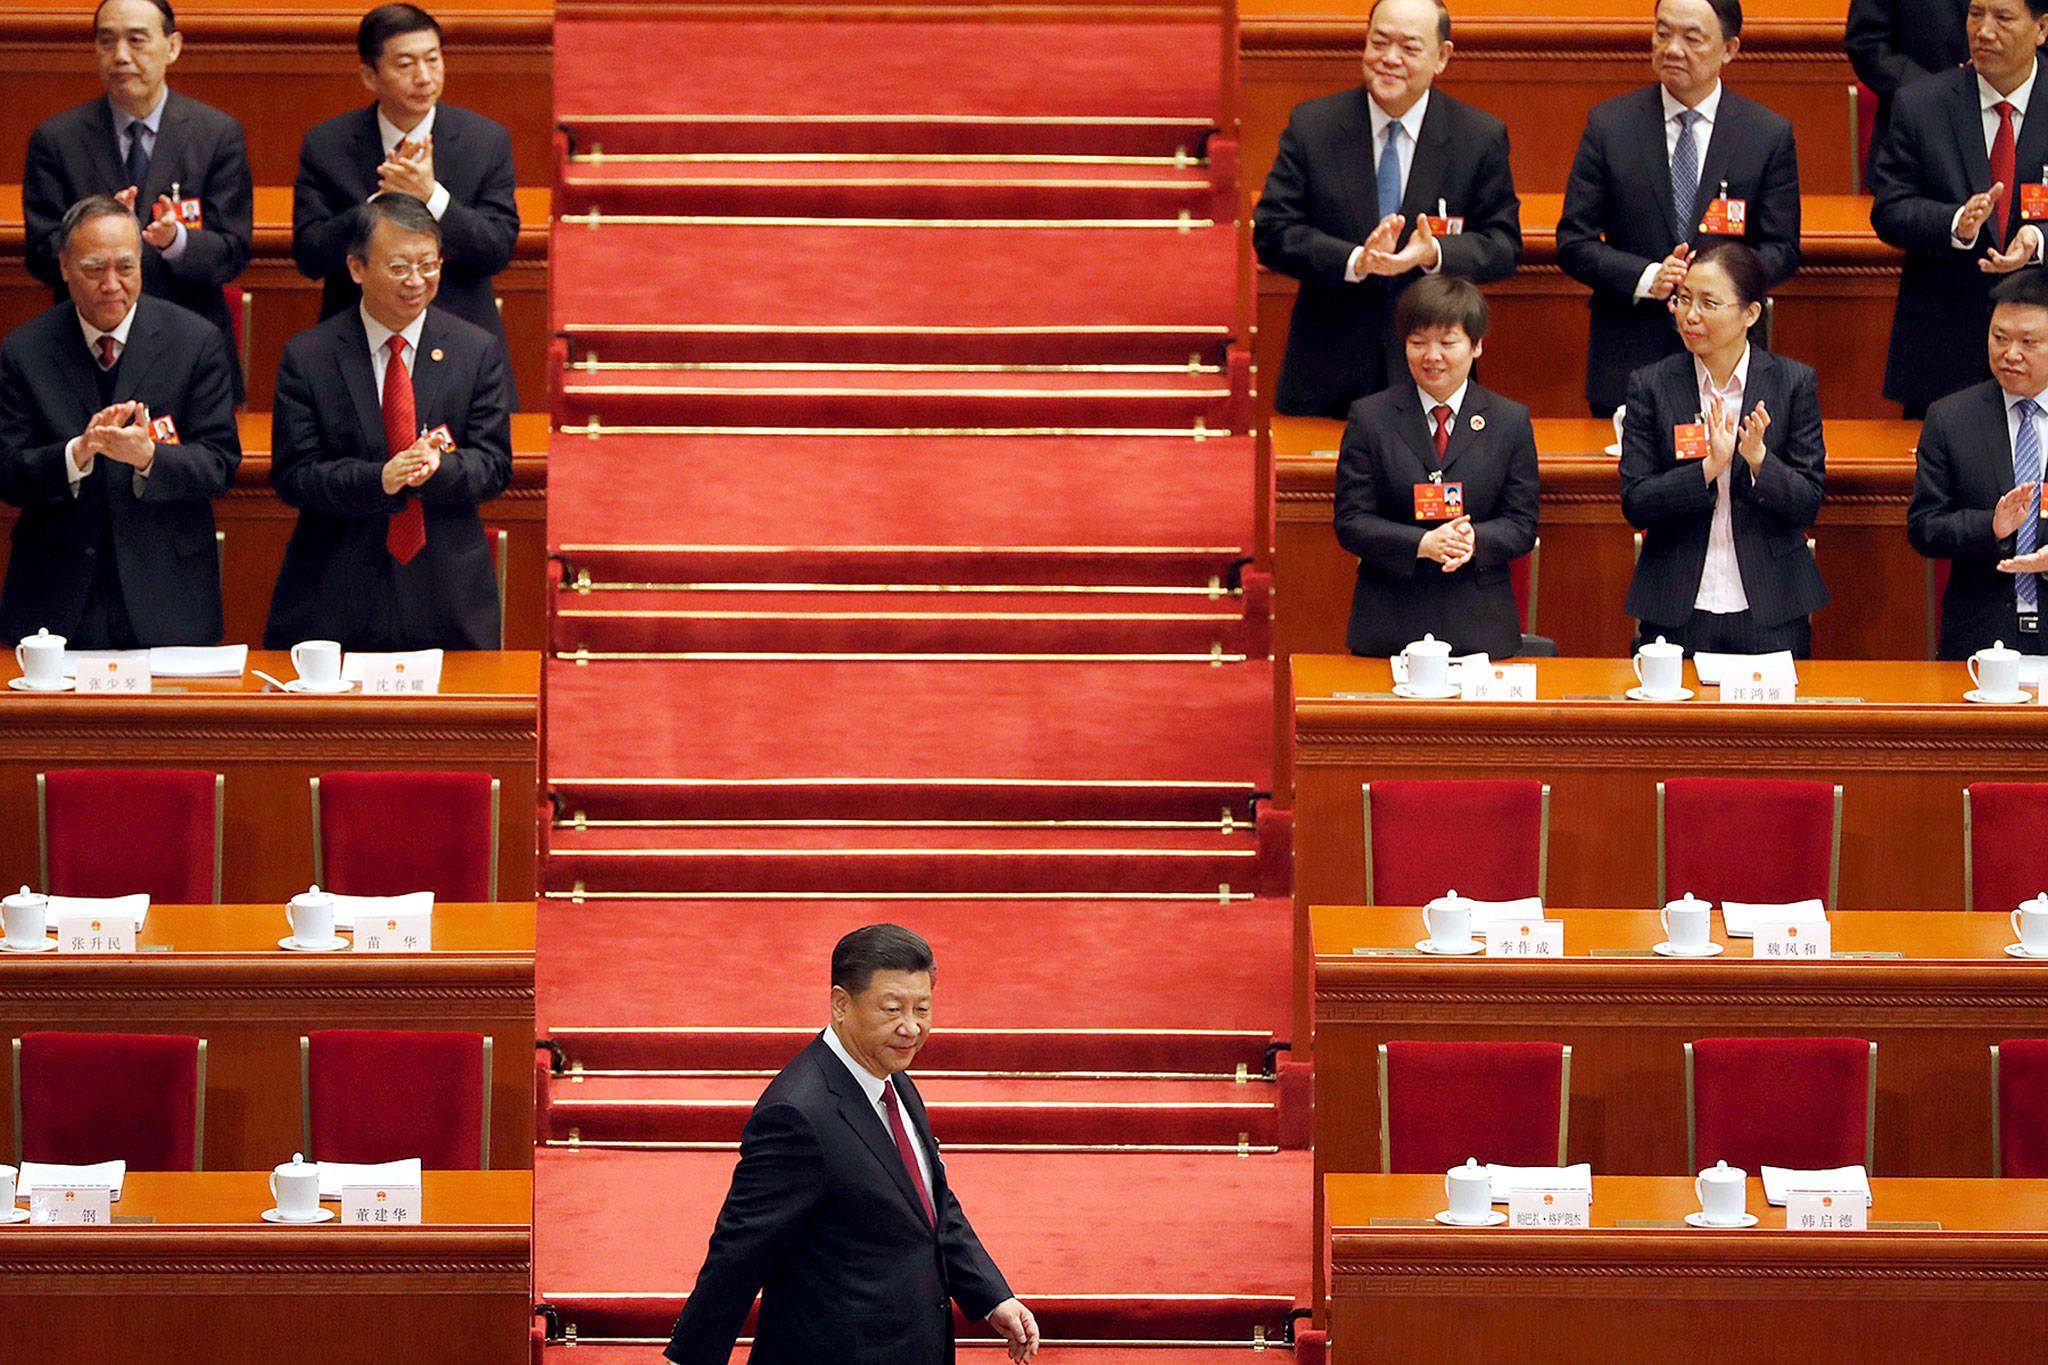 Chinese President Xi Jinping arrives for the opening session of the annual National People’s Congress in Beijing’s Great Hall of the People on Monday. (AP Photo/Ng Han Guan)